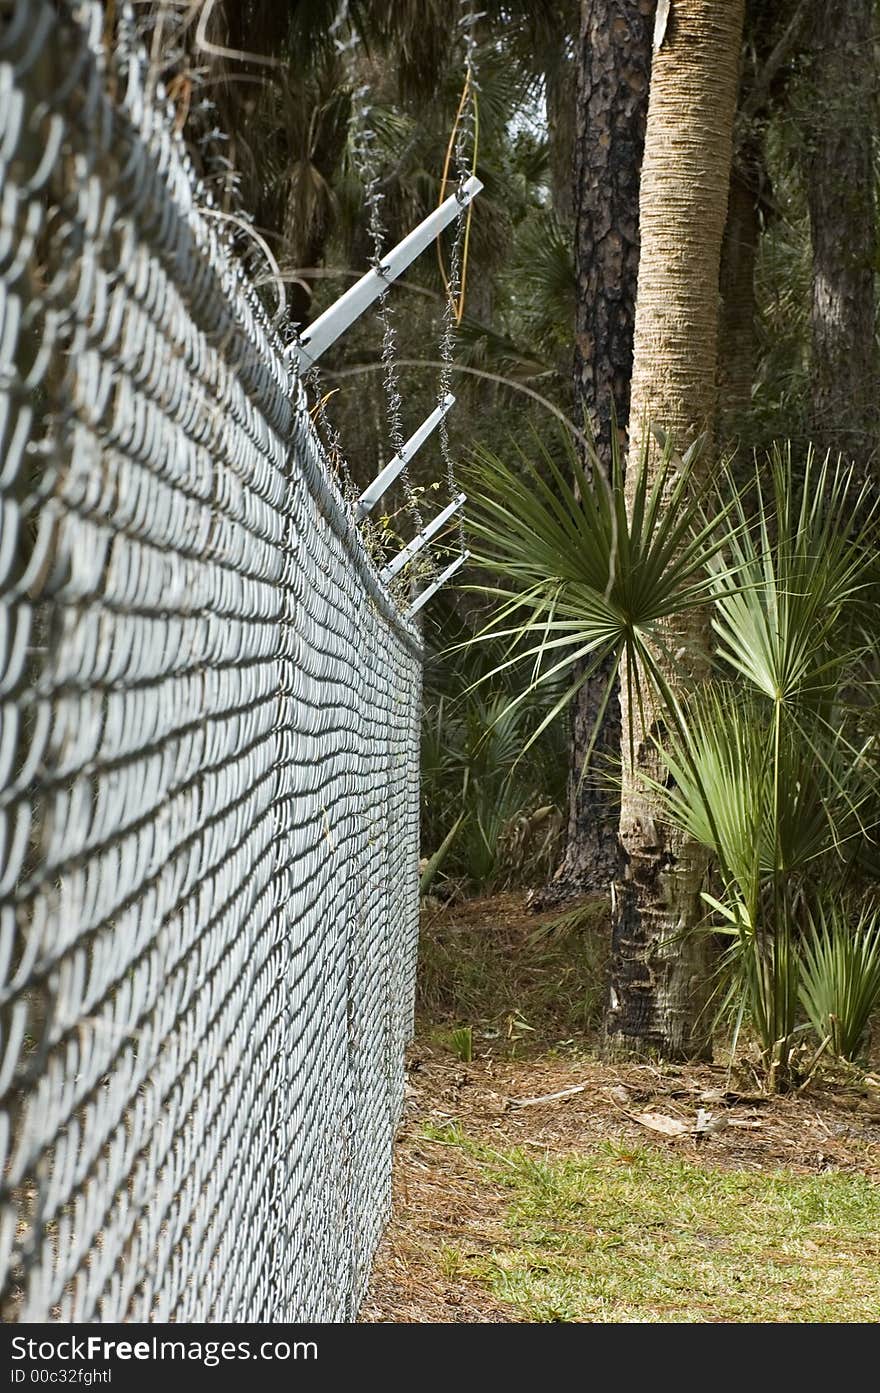 A chain-link fence with barbed wire on top. A chain-link fence with barbed wire on top.